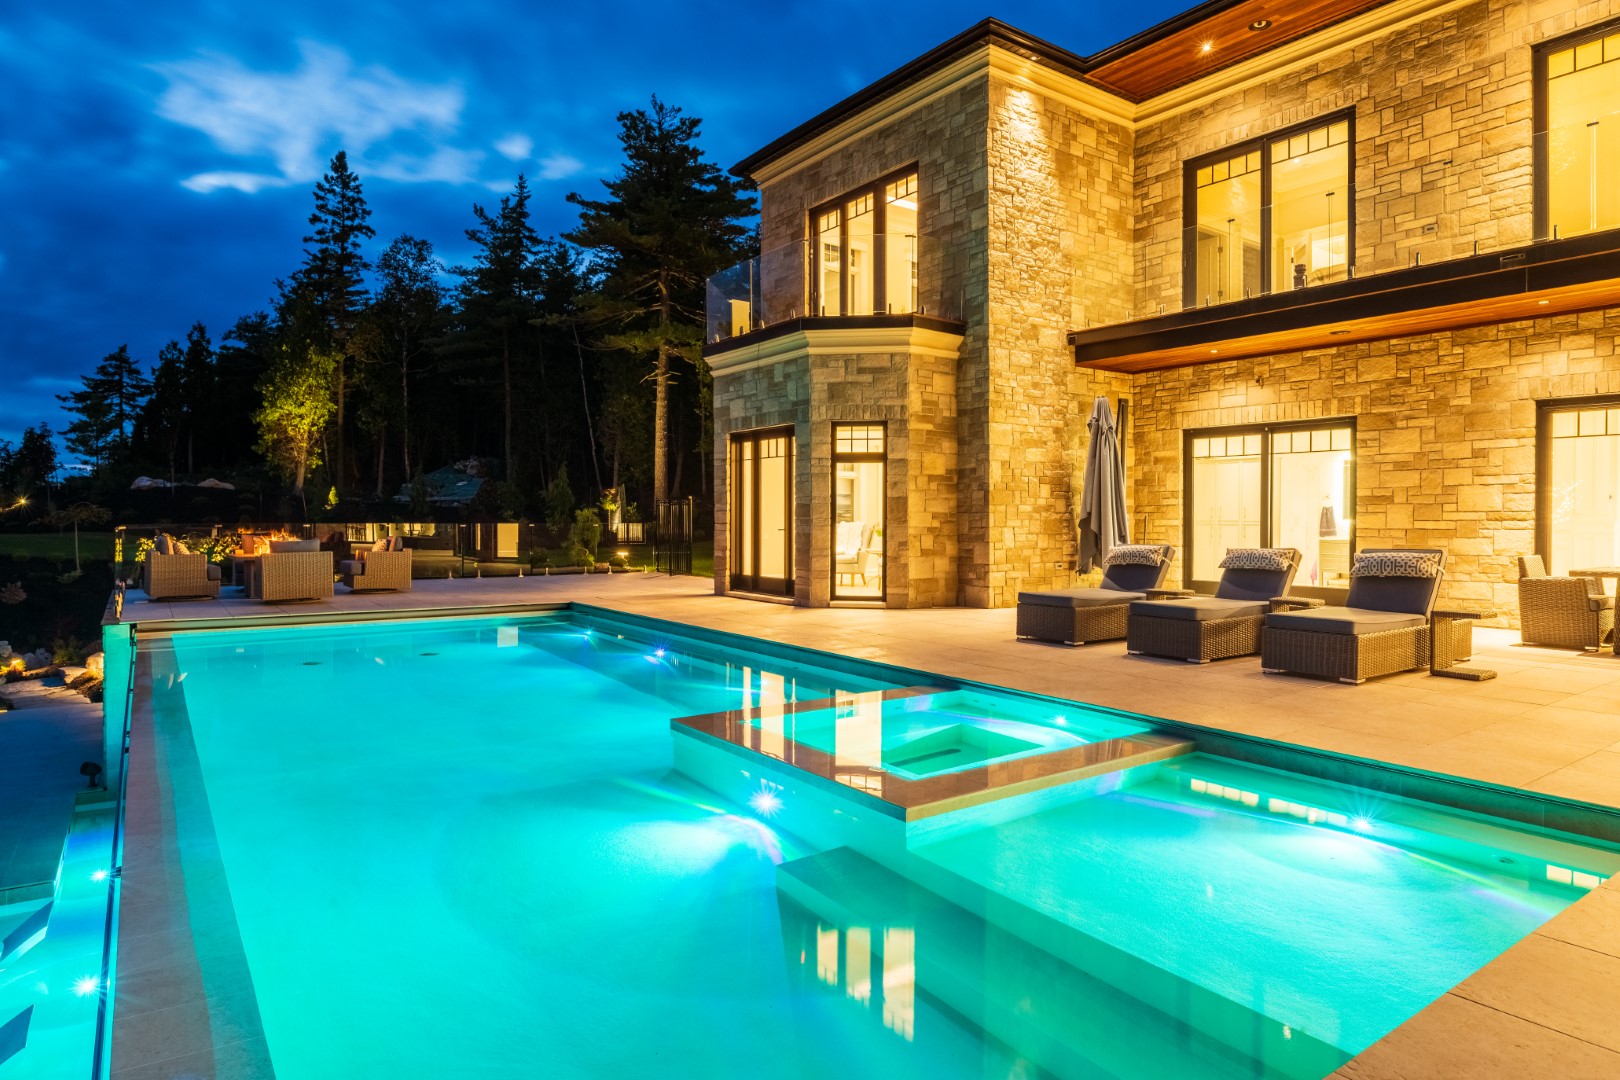 Luxury pool and hot tub with underwater lighting at night showing the back of home and garden in Saint John